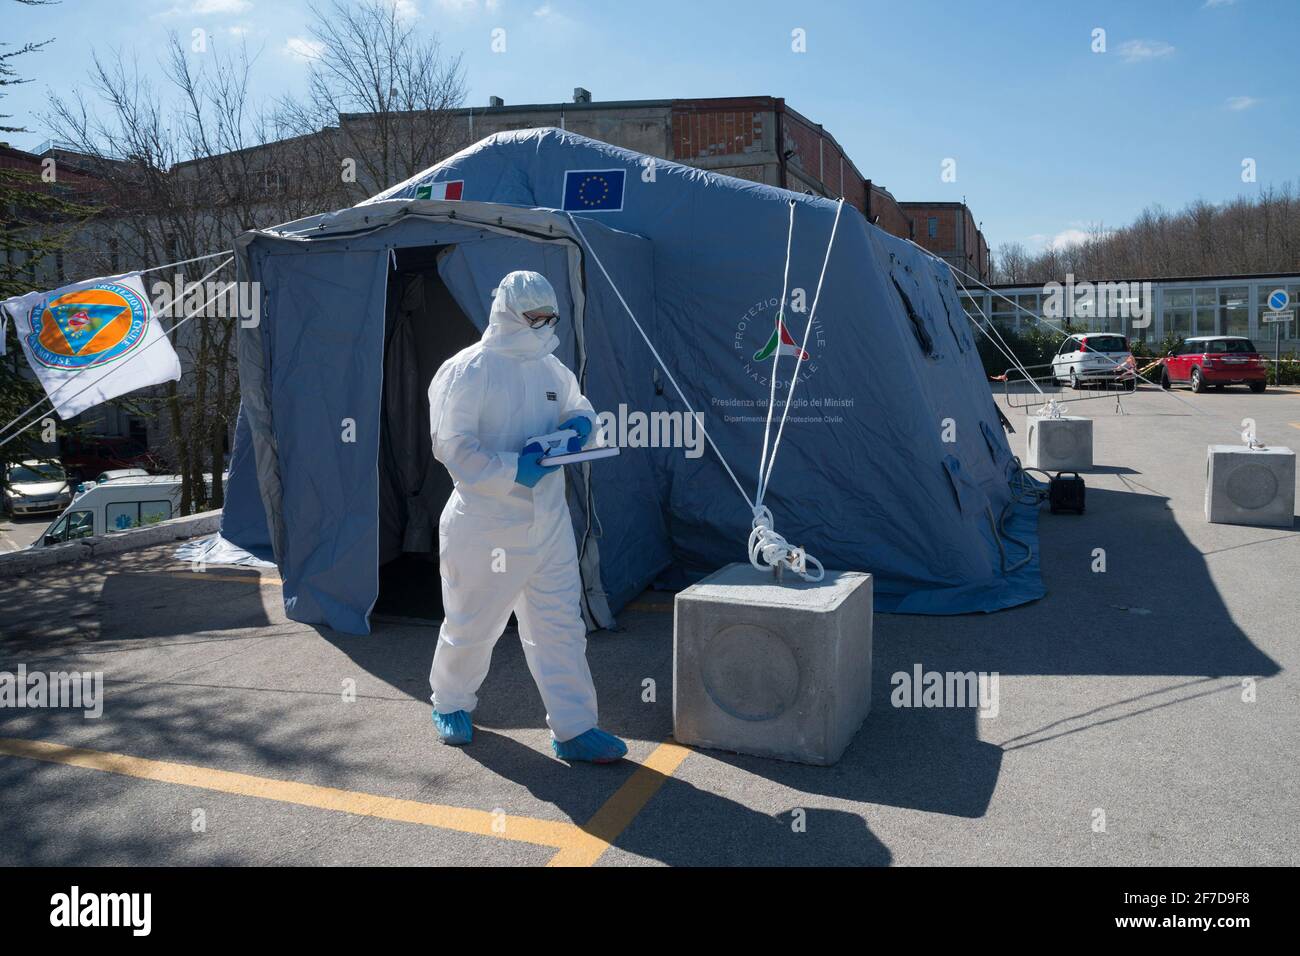 Campobasso,Molise Region,Italy:After analyzing a patient, a doctor exits the Triage tent and brings the data to be analyzed in the laboratory. Stock Photo